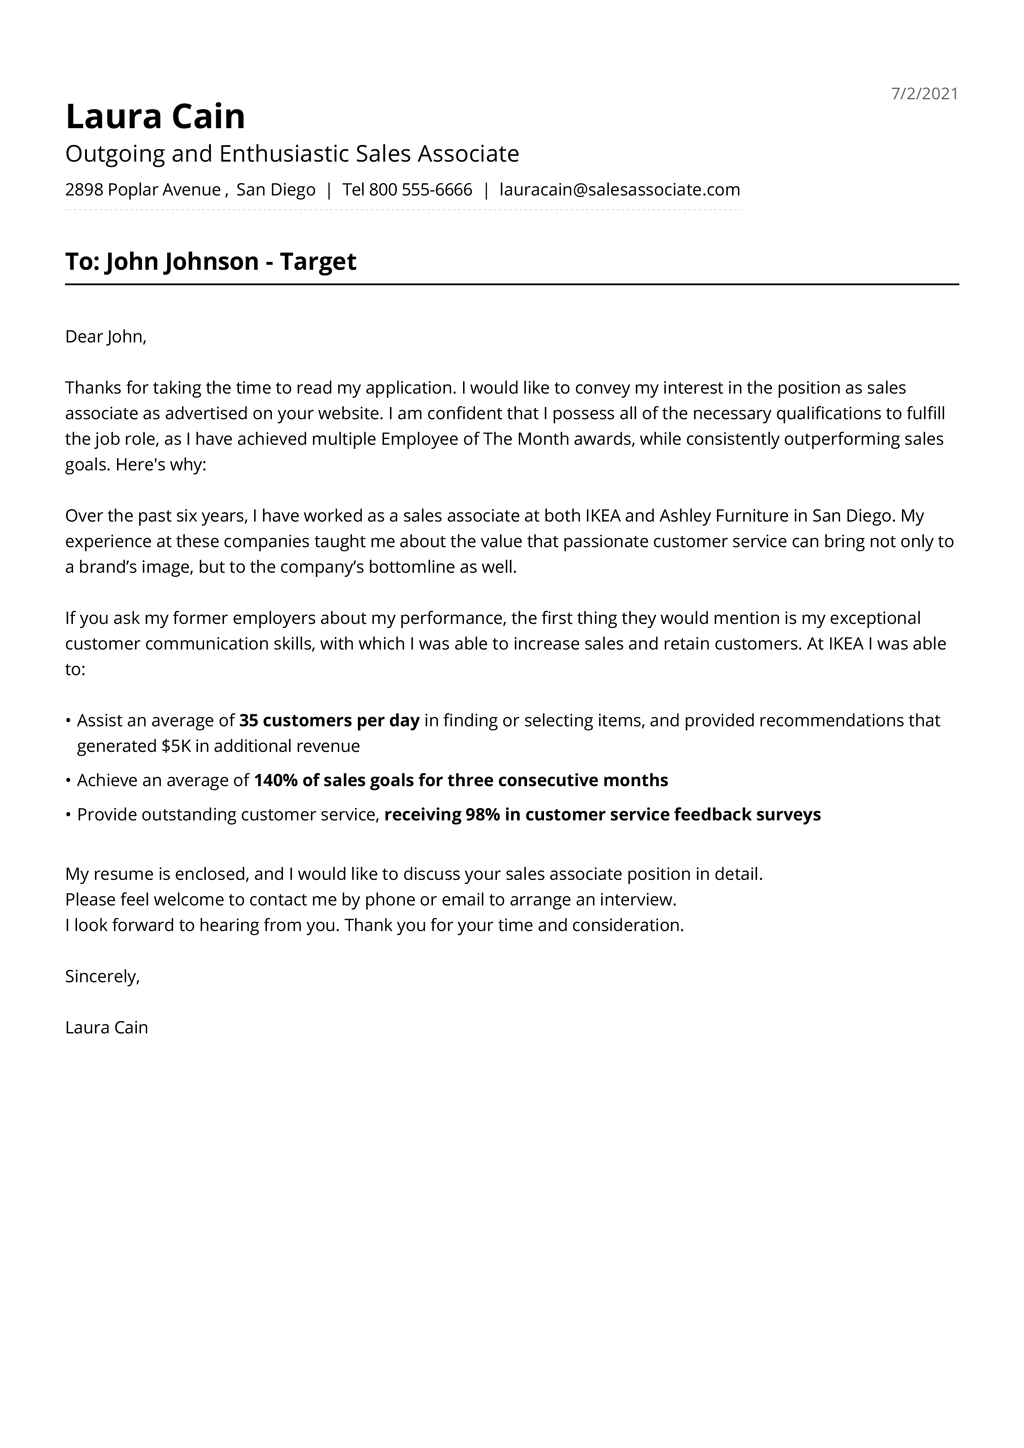 cover letter template variations